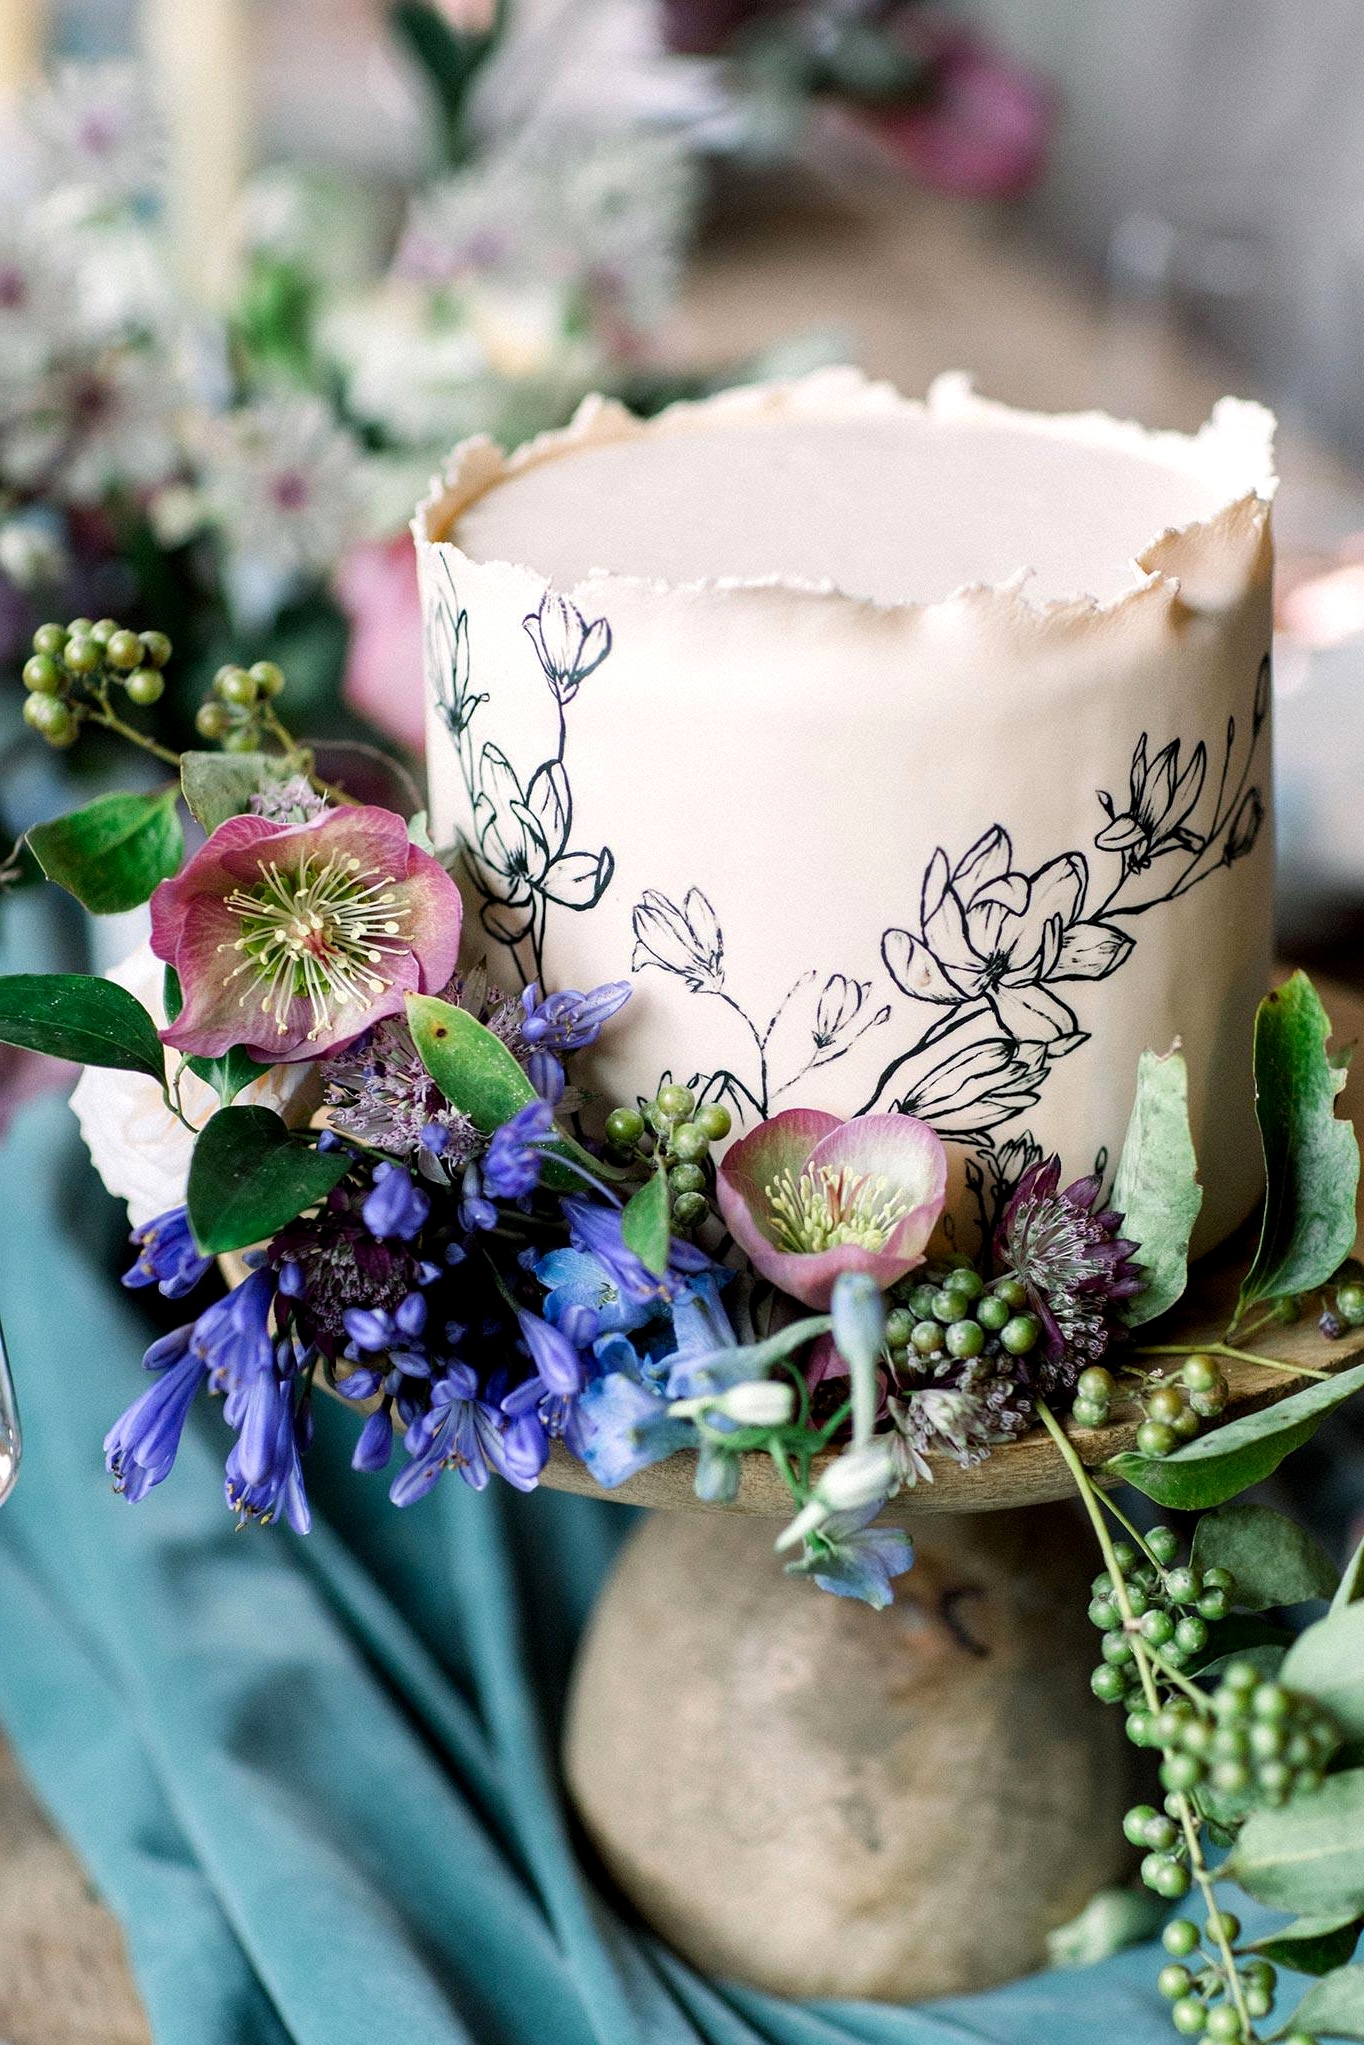 botanical sketch wedding cake with fresh flower accents and a wooden cake stand